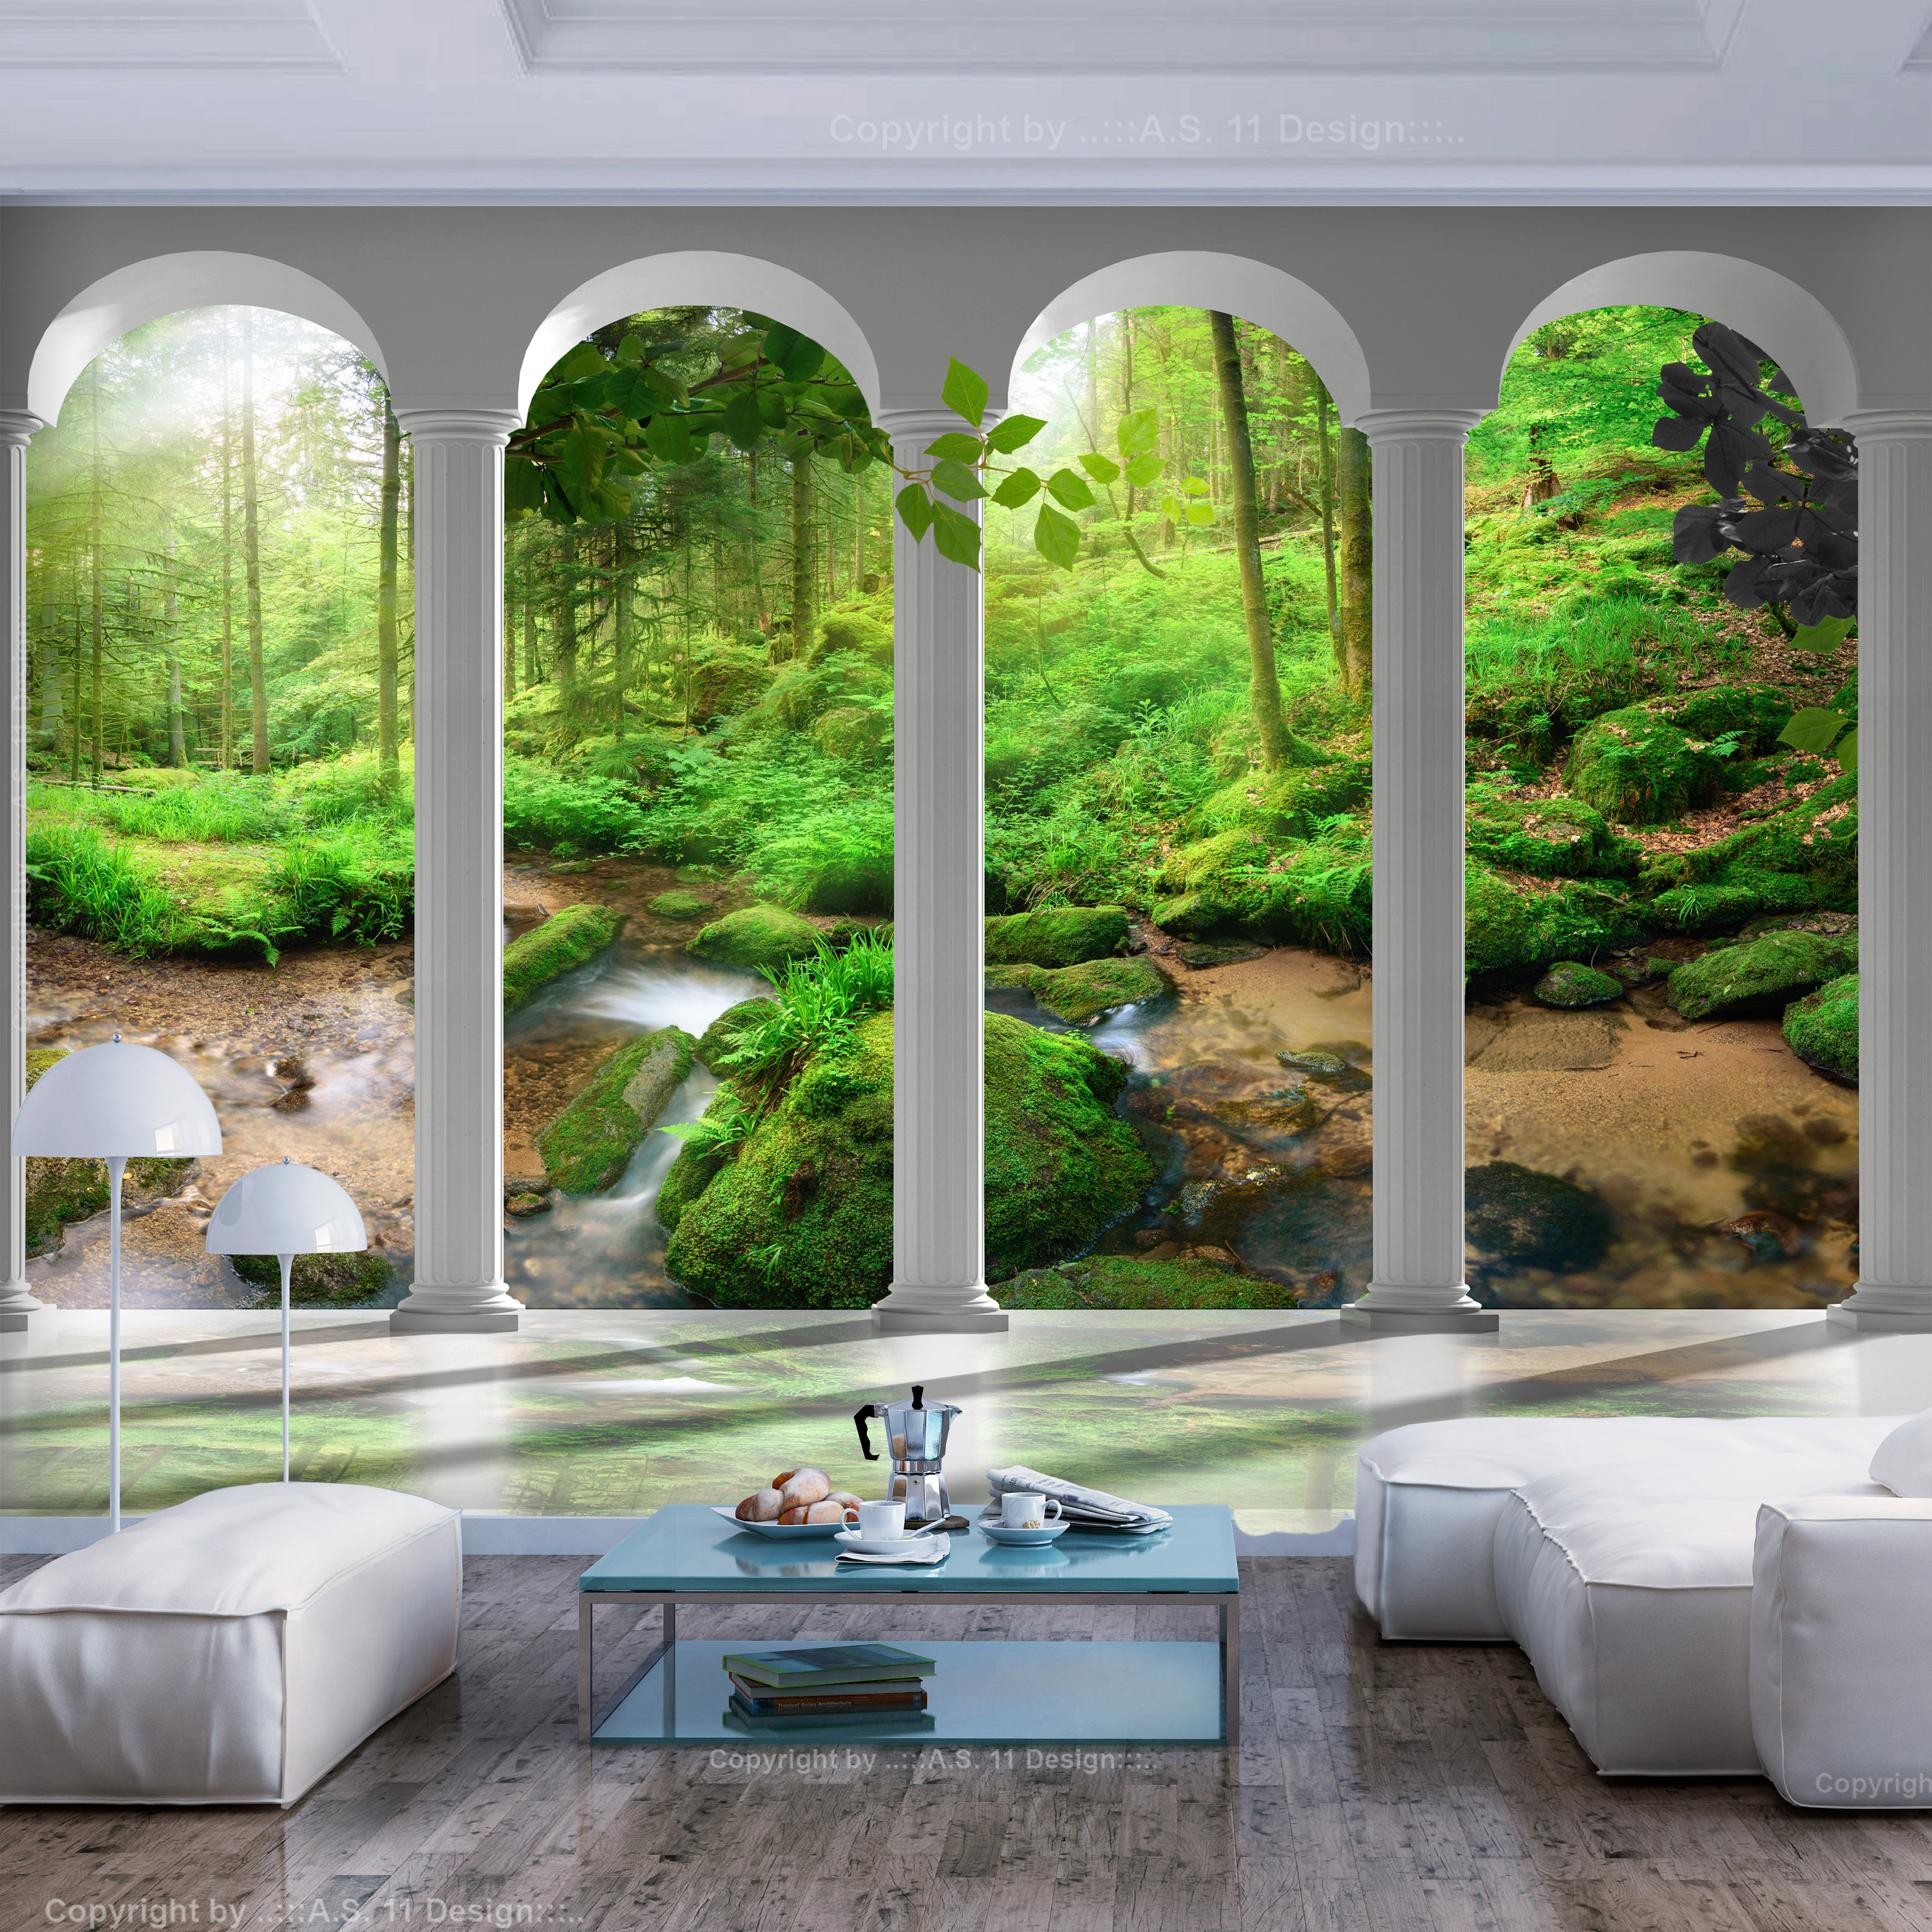 Self-adhesive Wallpaper - Pillars and Forest - 392x280